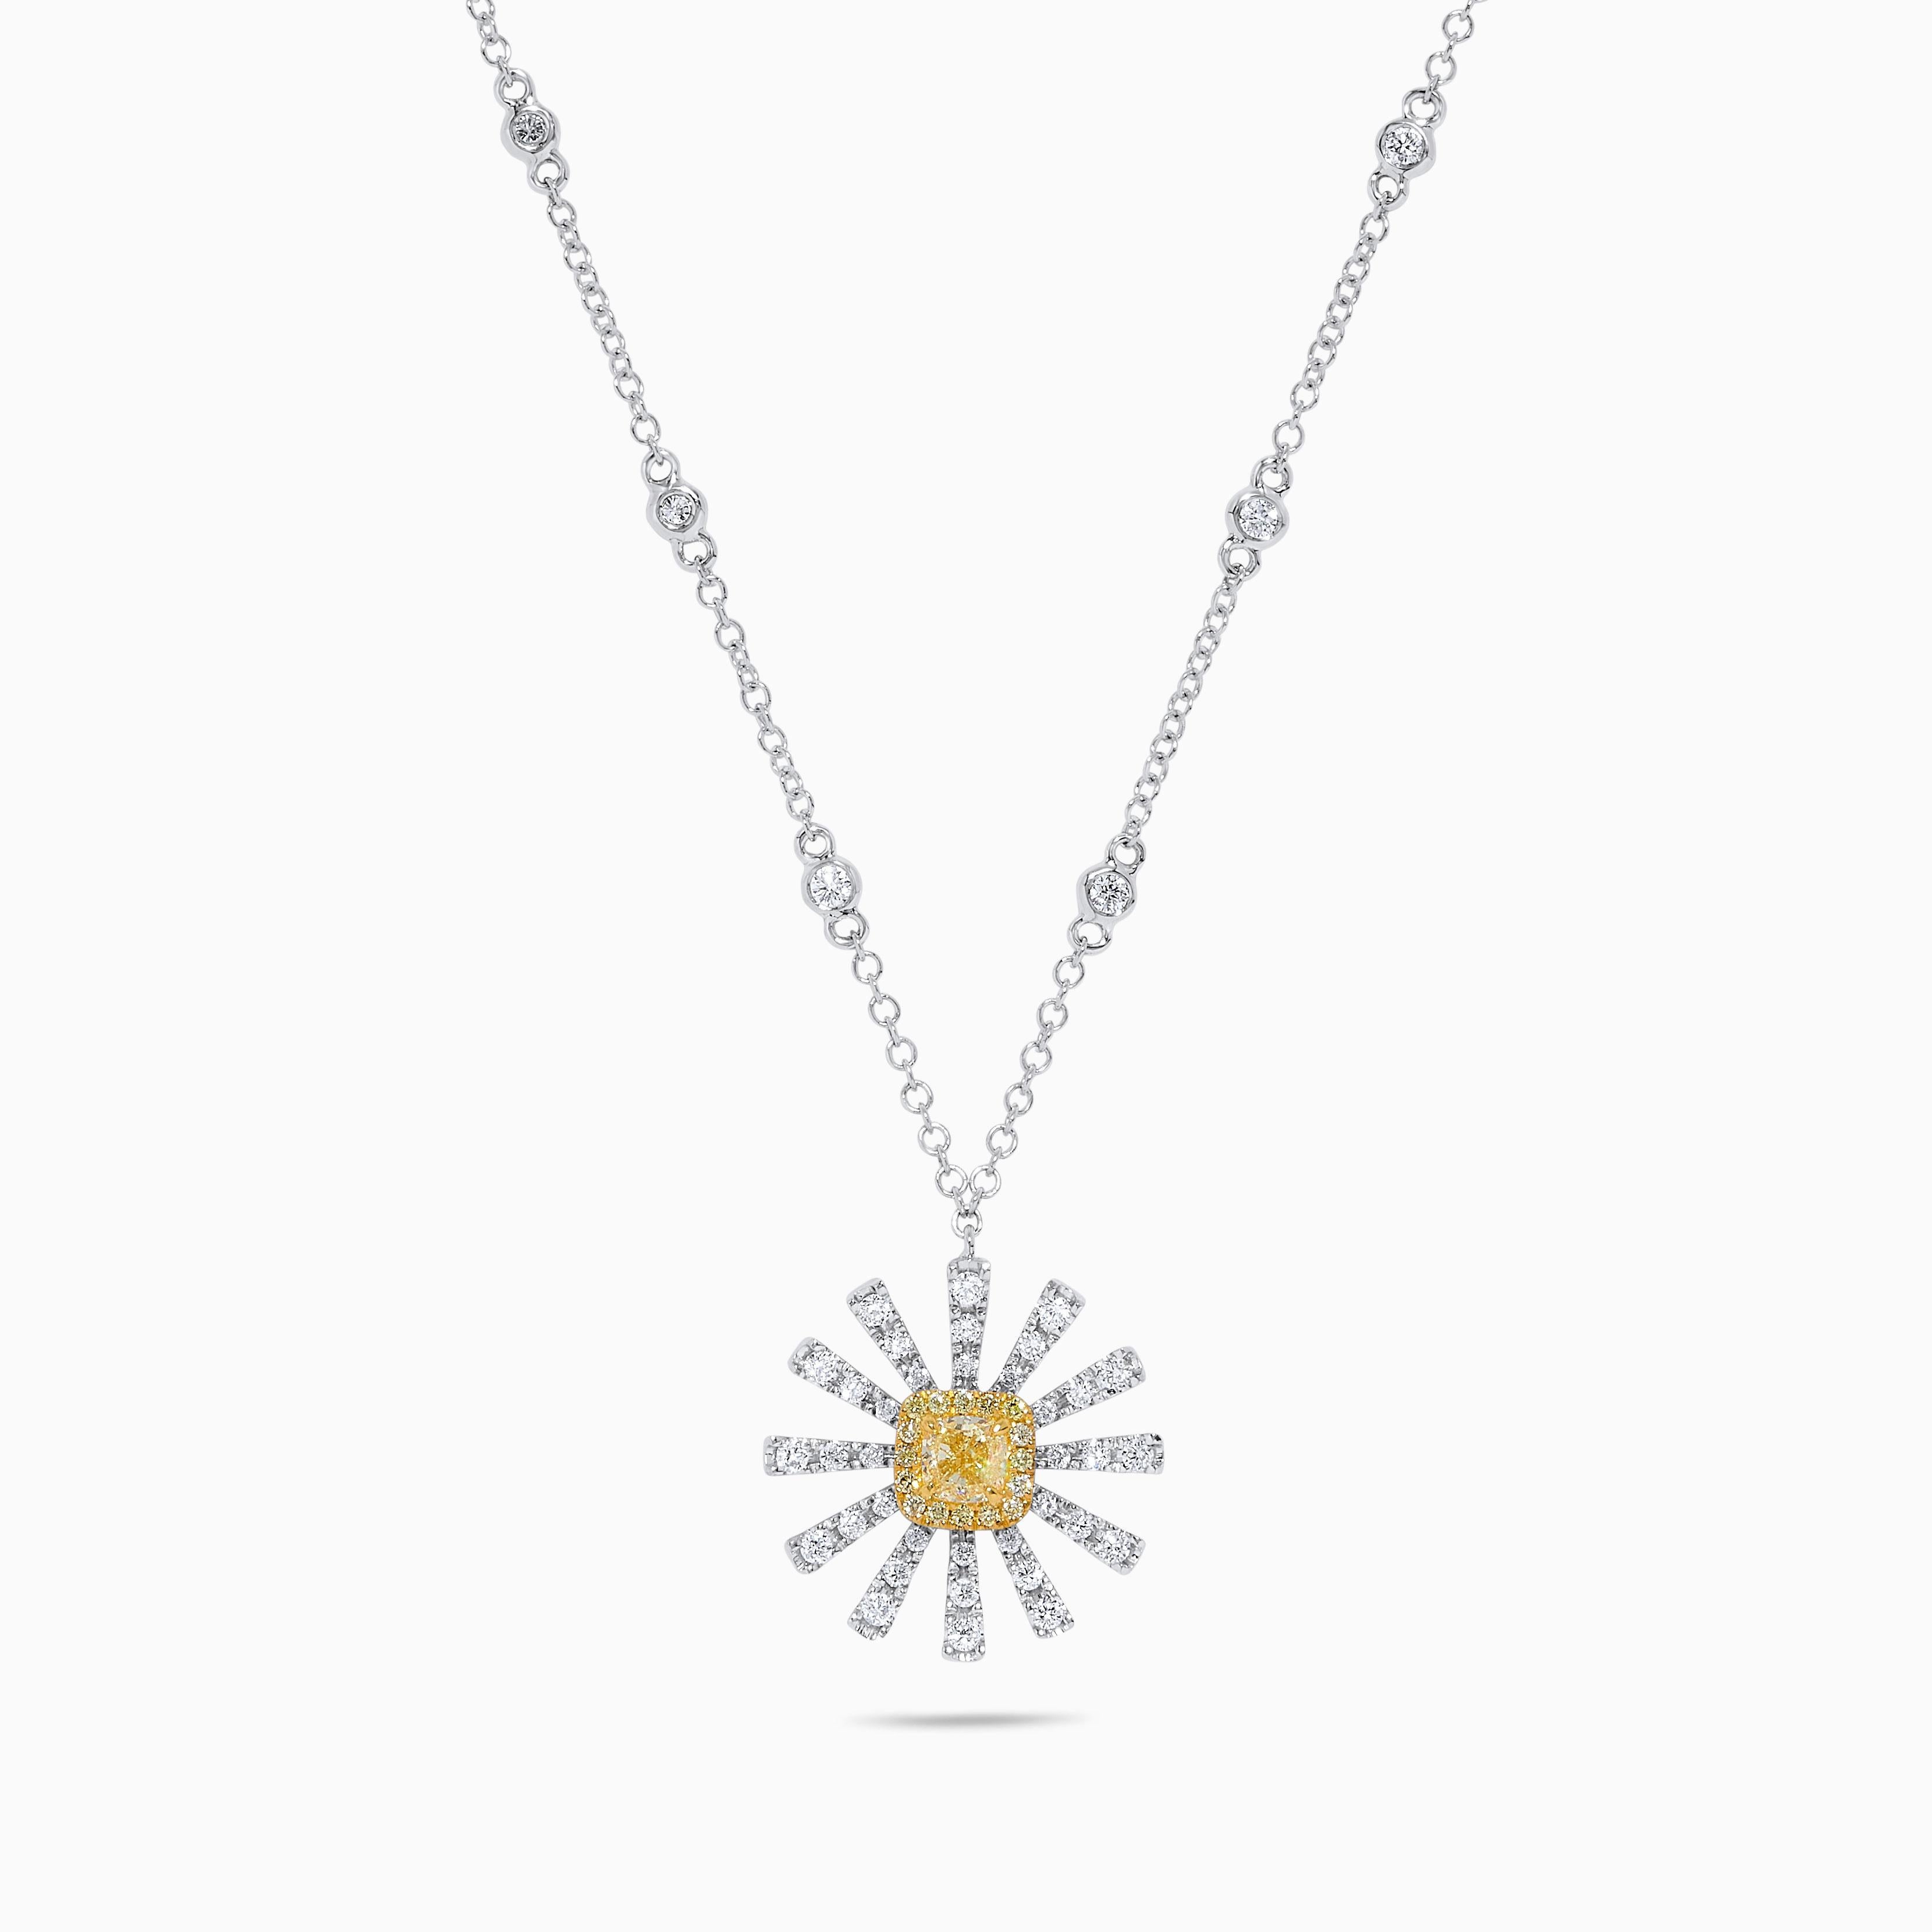 RareGemWorld's intriguing diamond pendant. Mounted in a beautiful 18K Yellow and White Gold setting with a natural cushion cut yellow diamond. The yellow diamond is surrounded by round natural yellow diamond melee and round natural white diamond